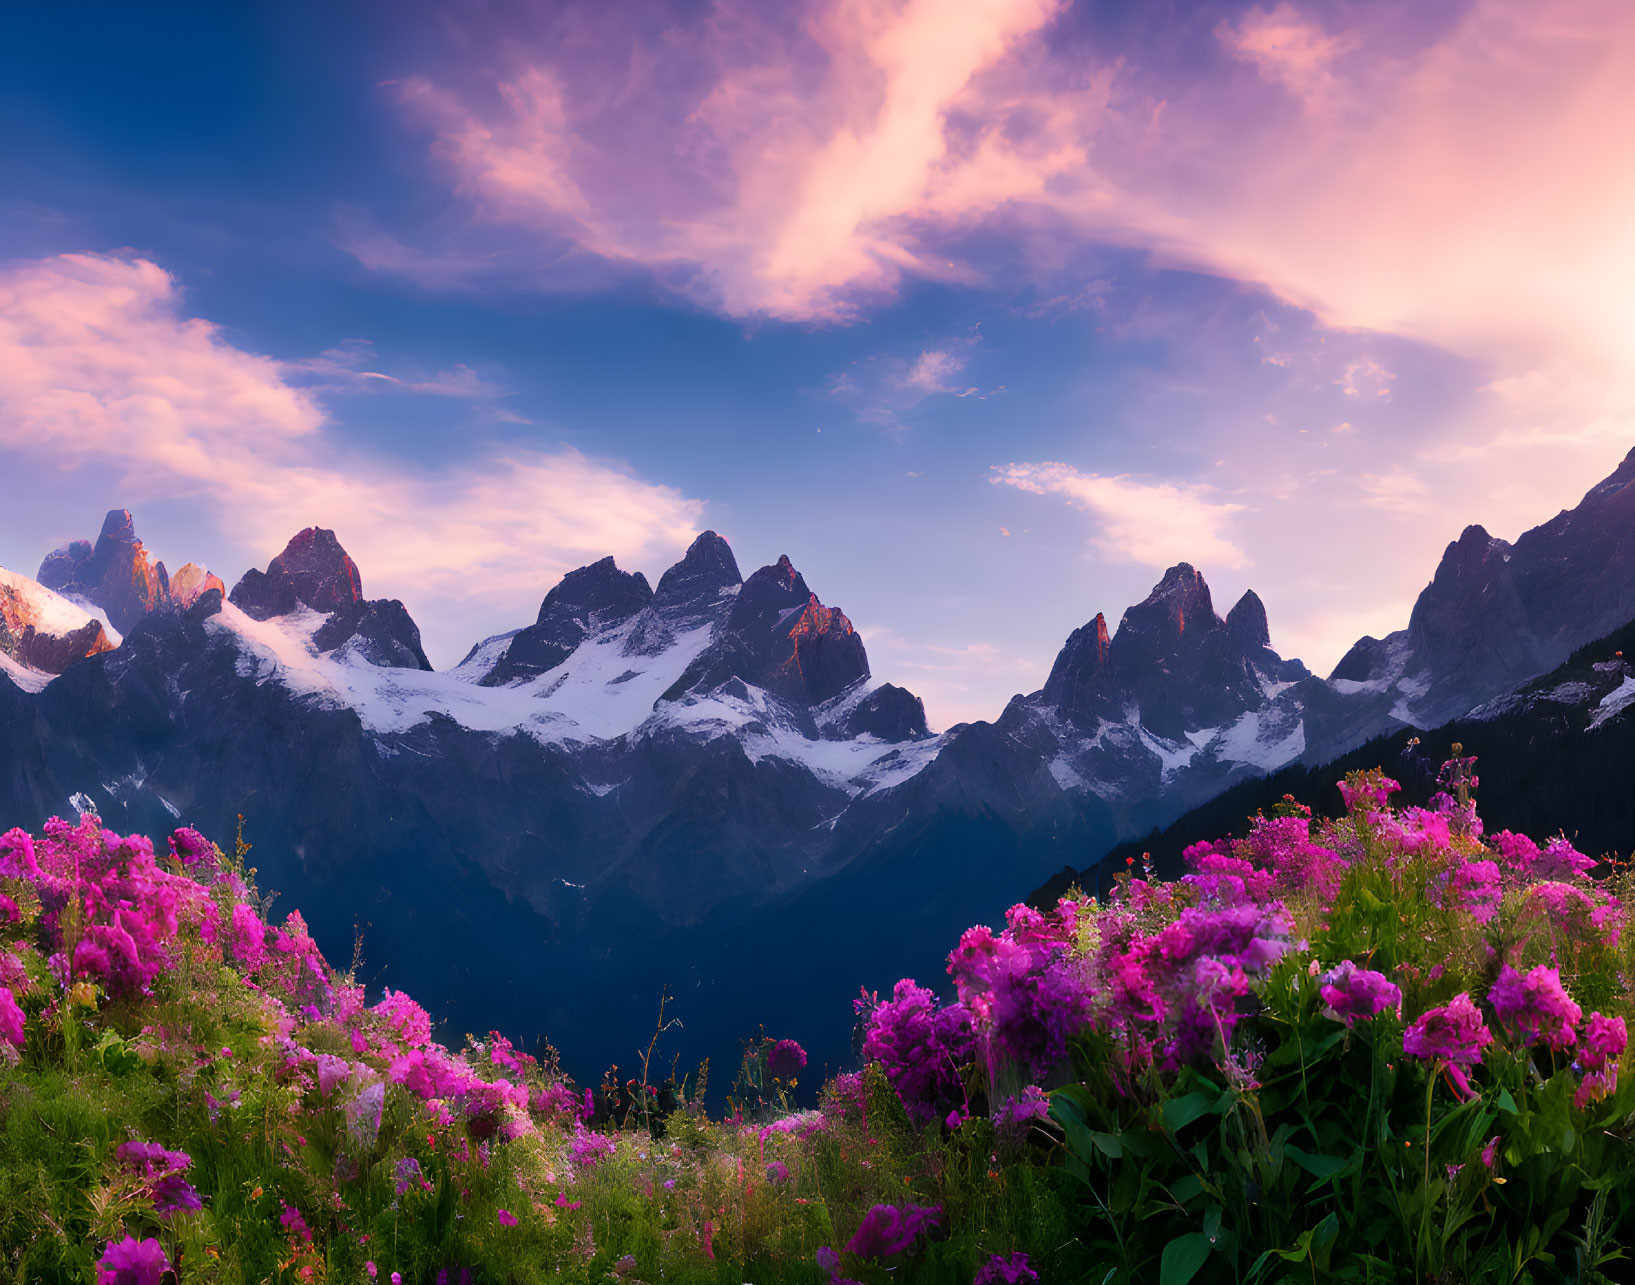 Scenic mountain peaks at sunset with vibrant wildflowers